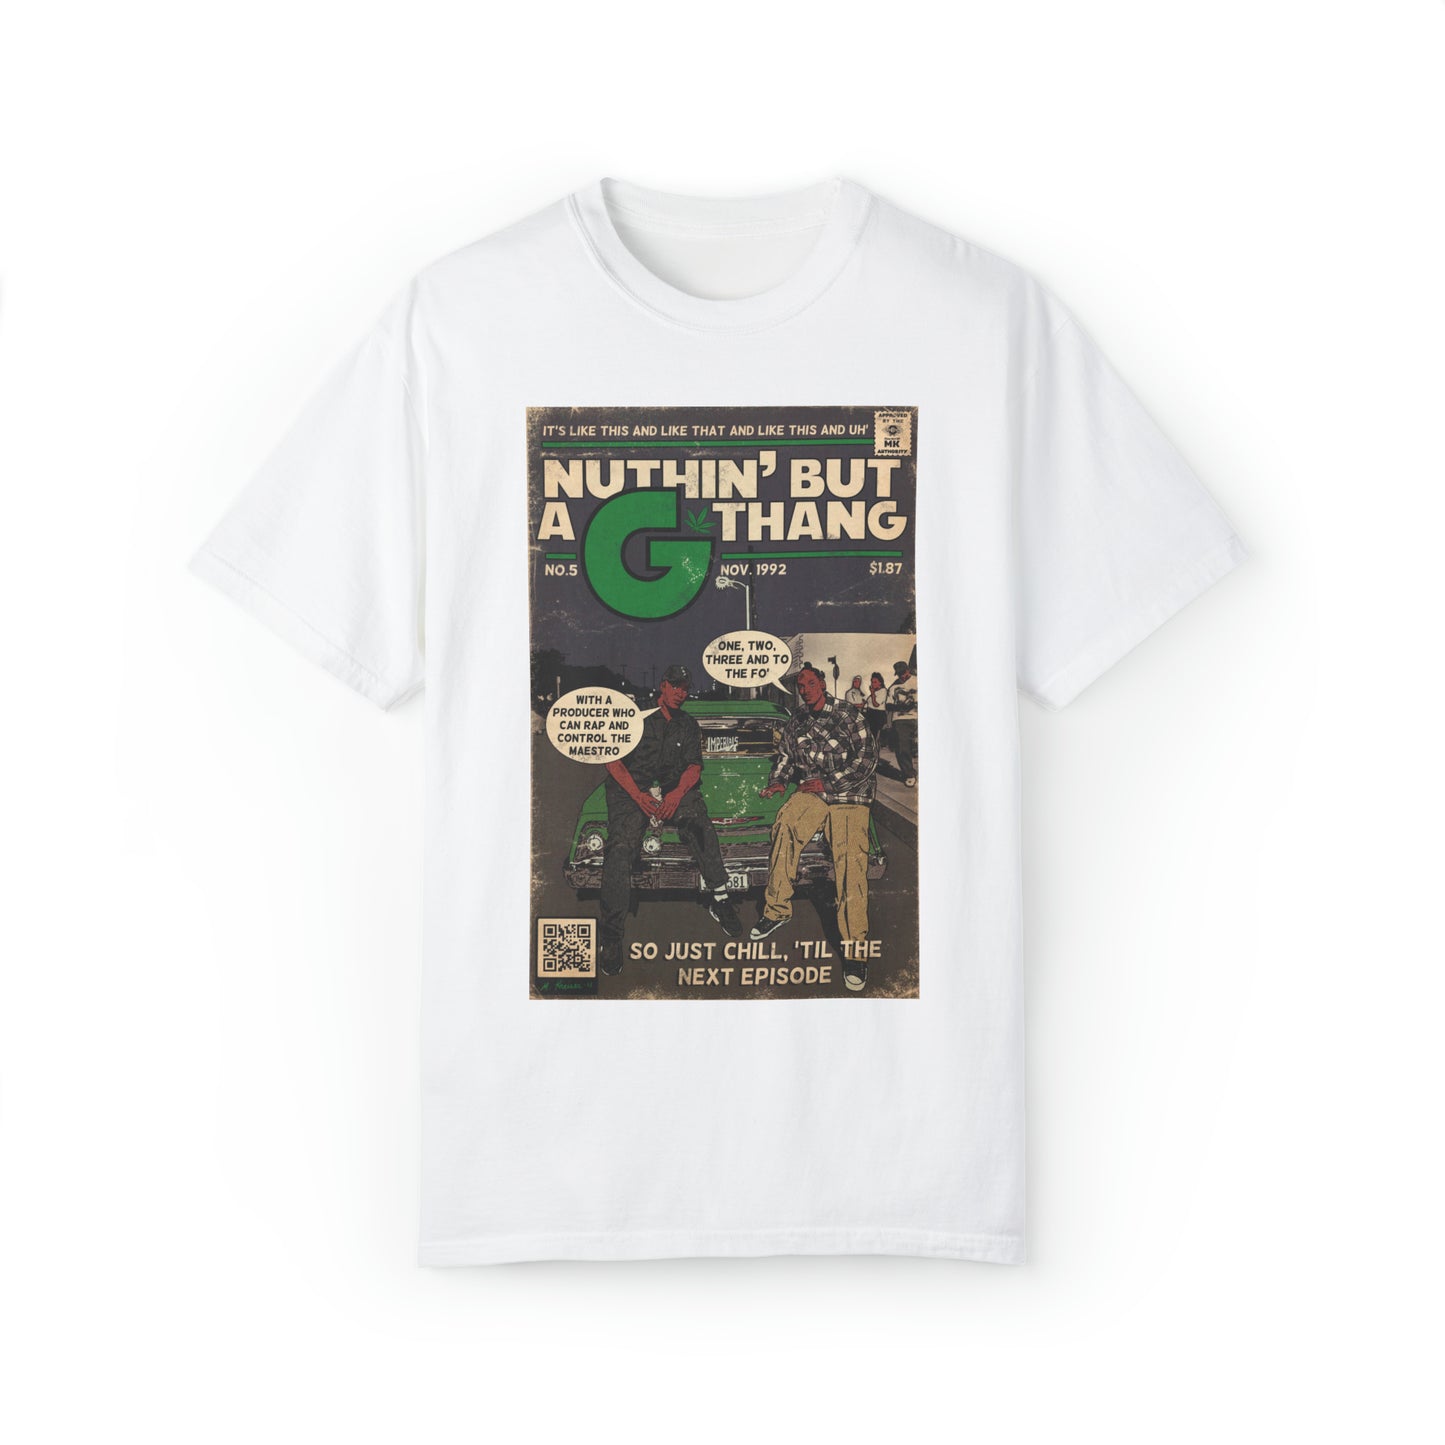 Dr. Dre & Snoop Dogg - Ain’t Nuthin But a G Thang - Unisex Comfort Colors T-shirt